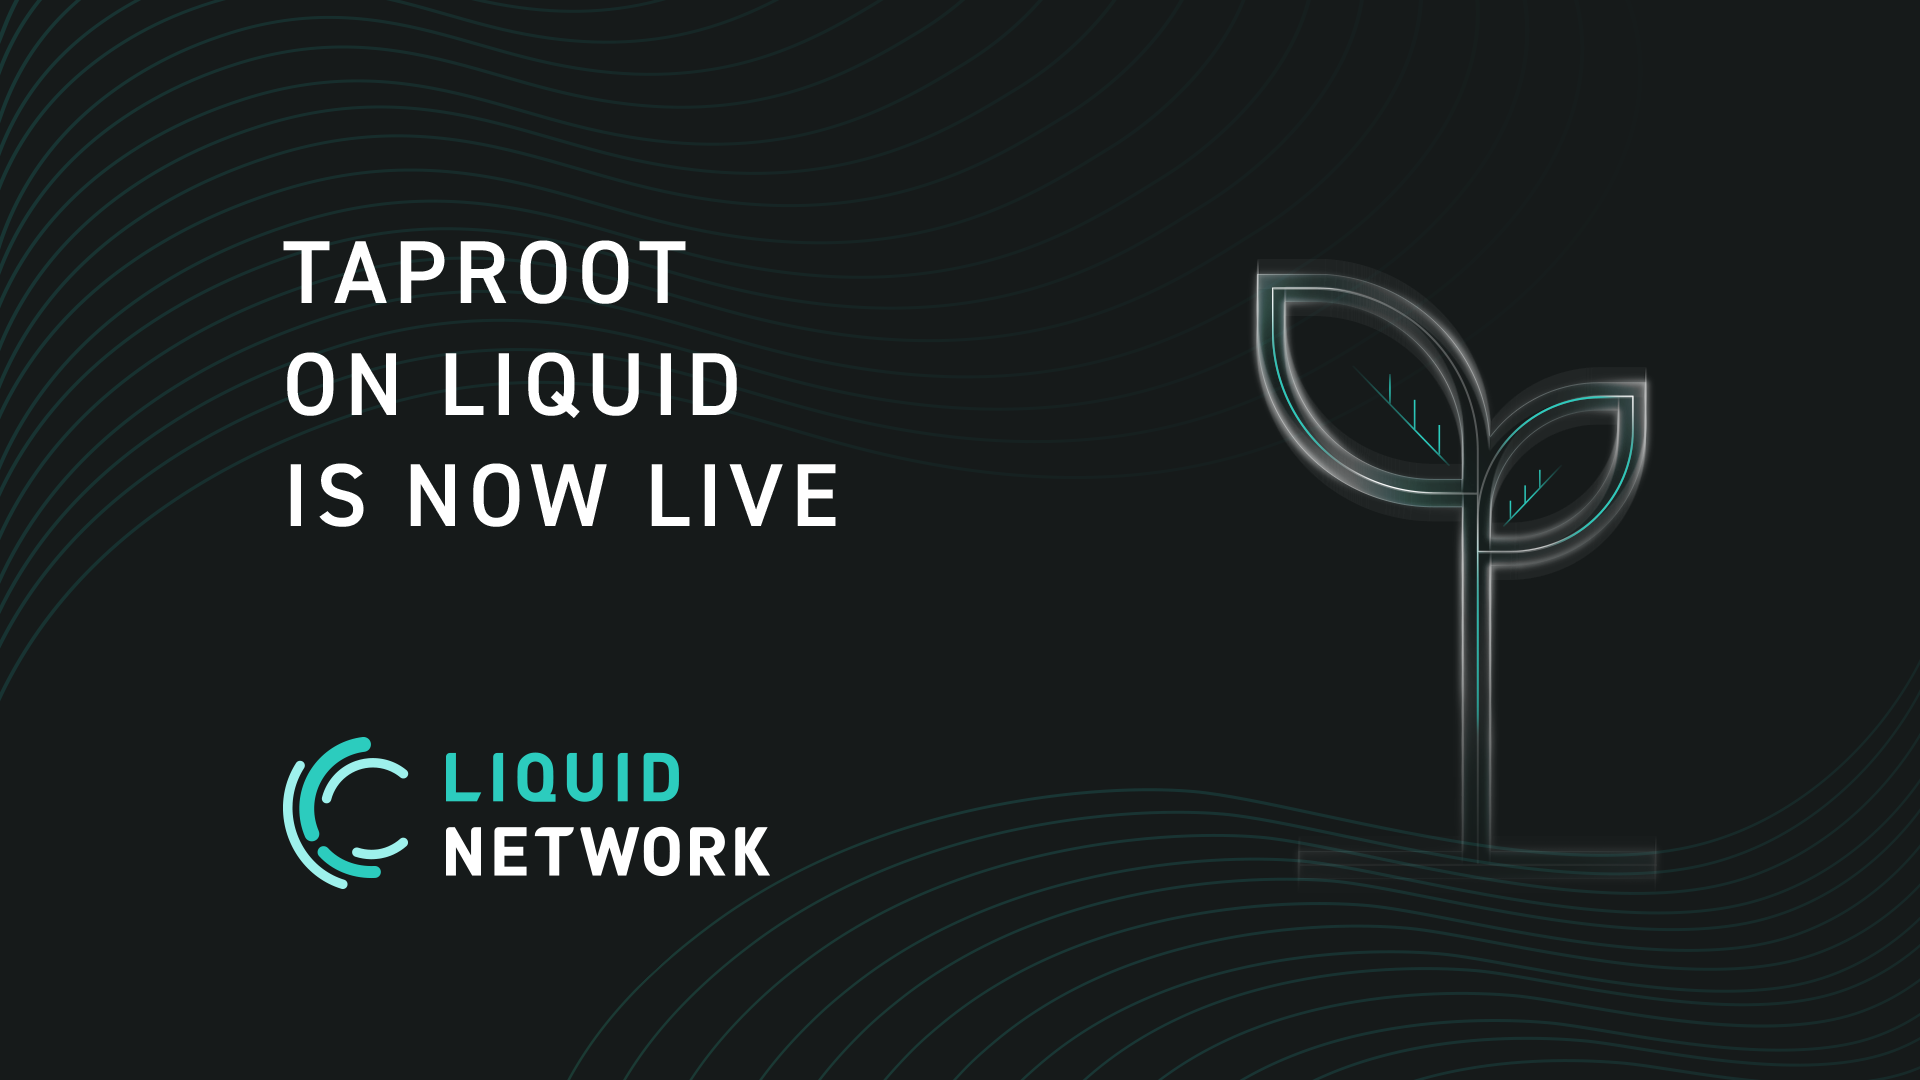 Taproot on Liquid is Now Live